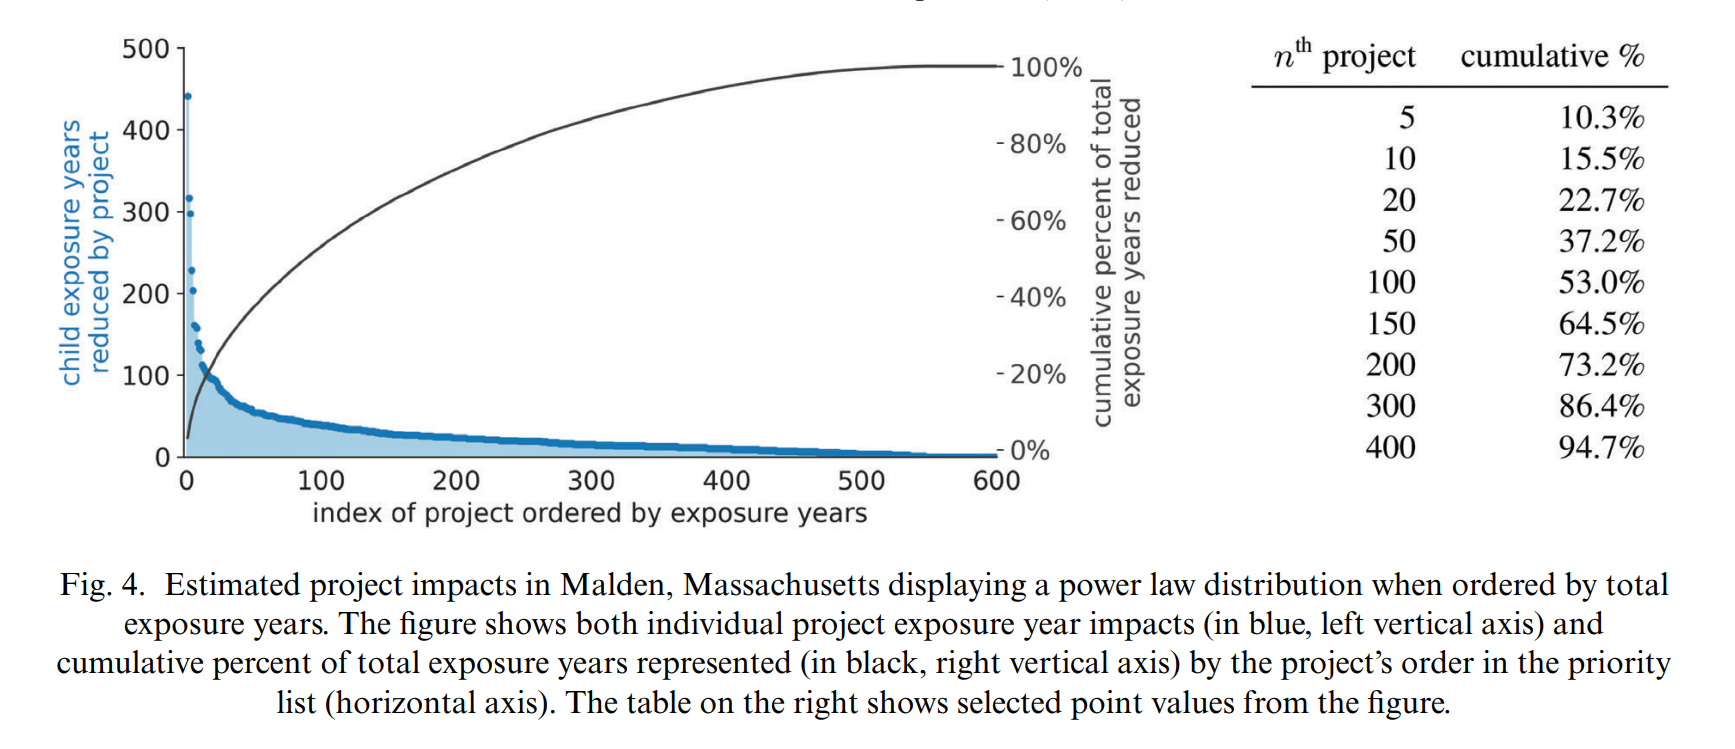 Figure 4 from the linked paper showing power law distribution of project value.